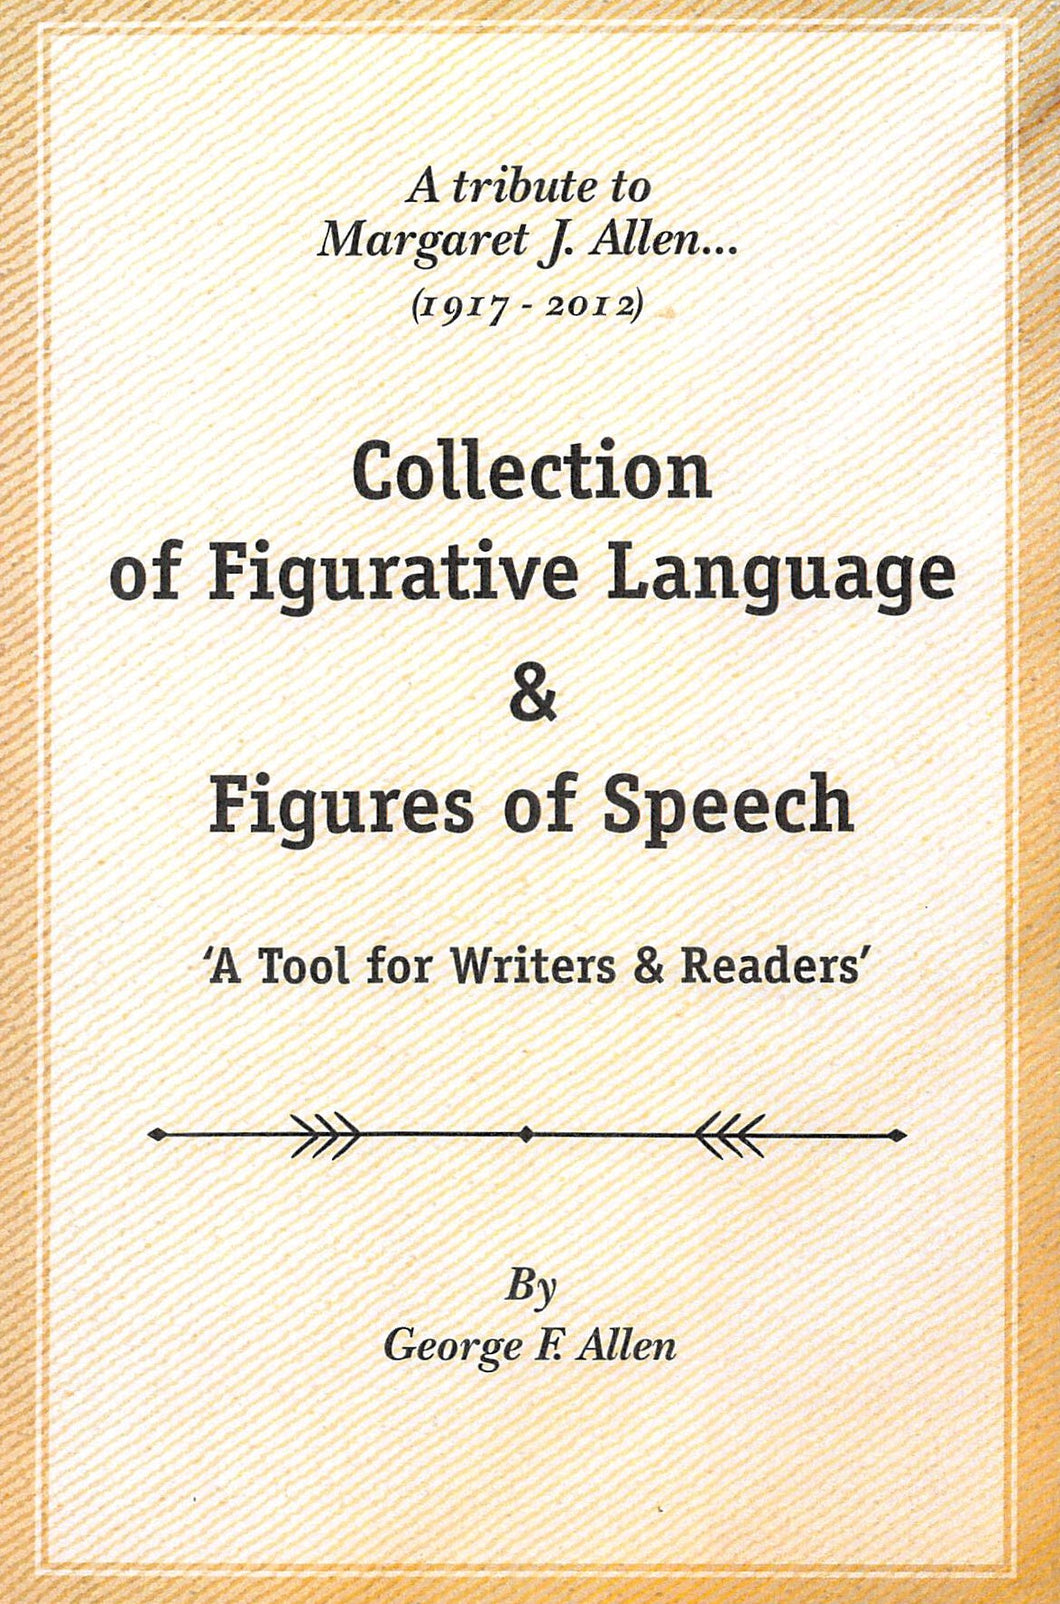 Collection of Figurative Language & Figures of Speech